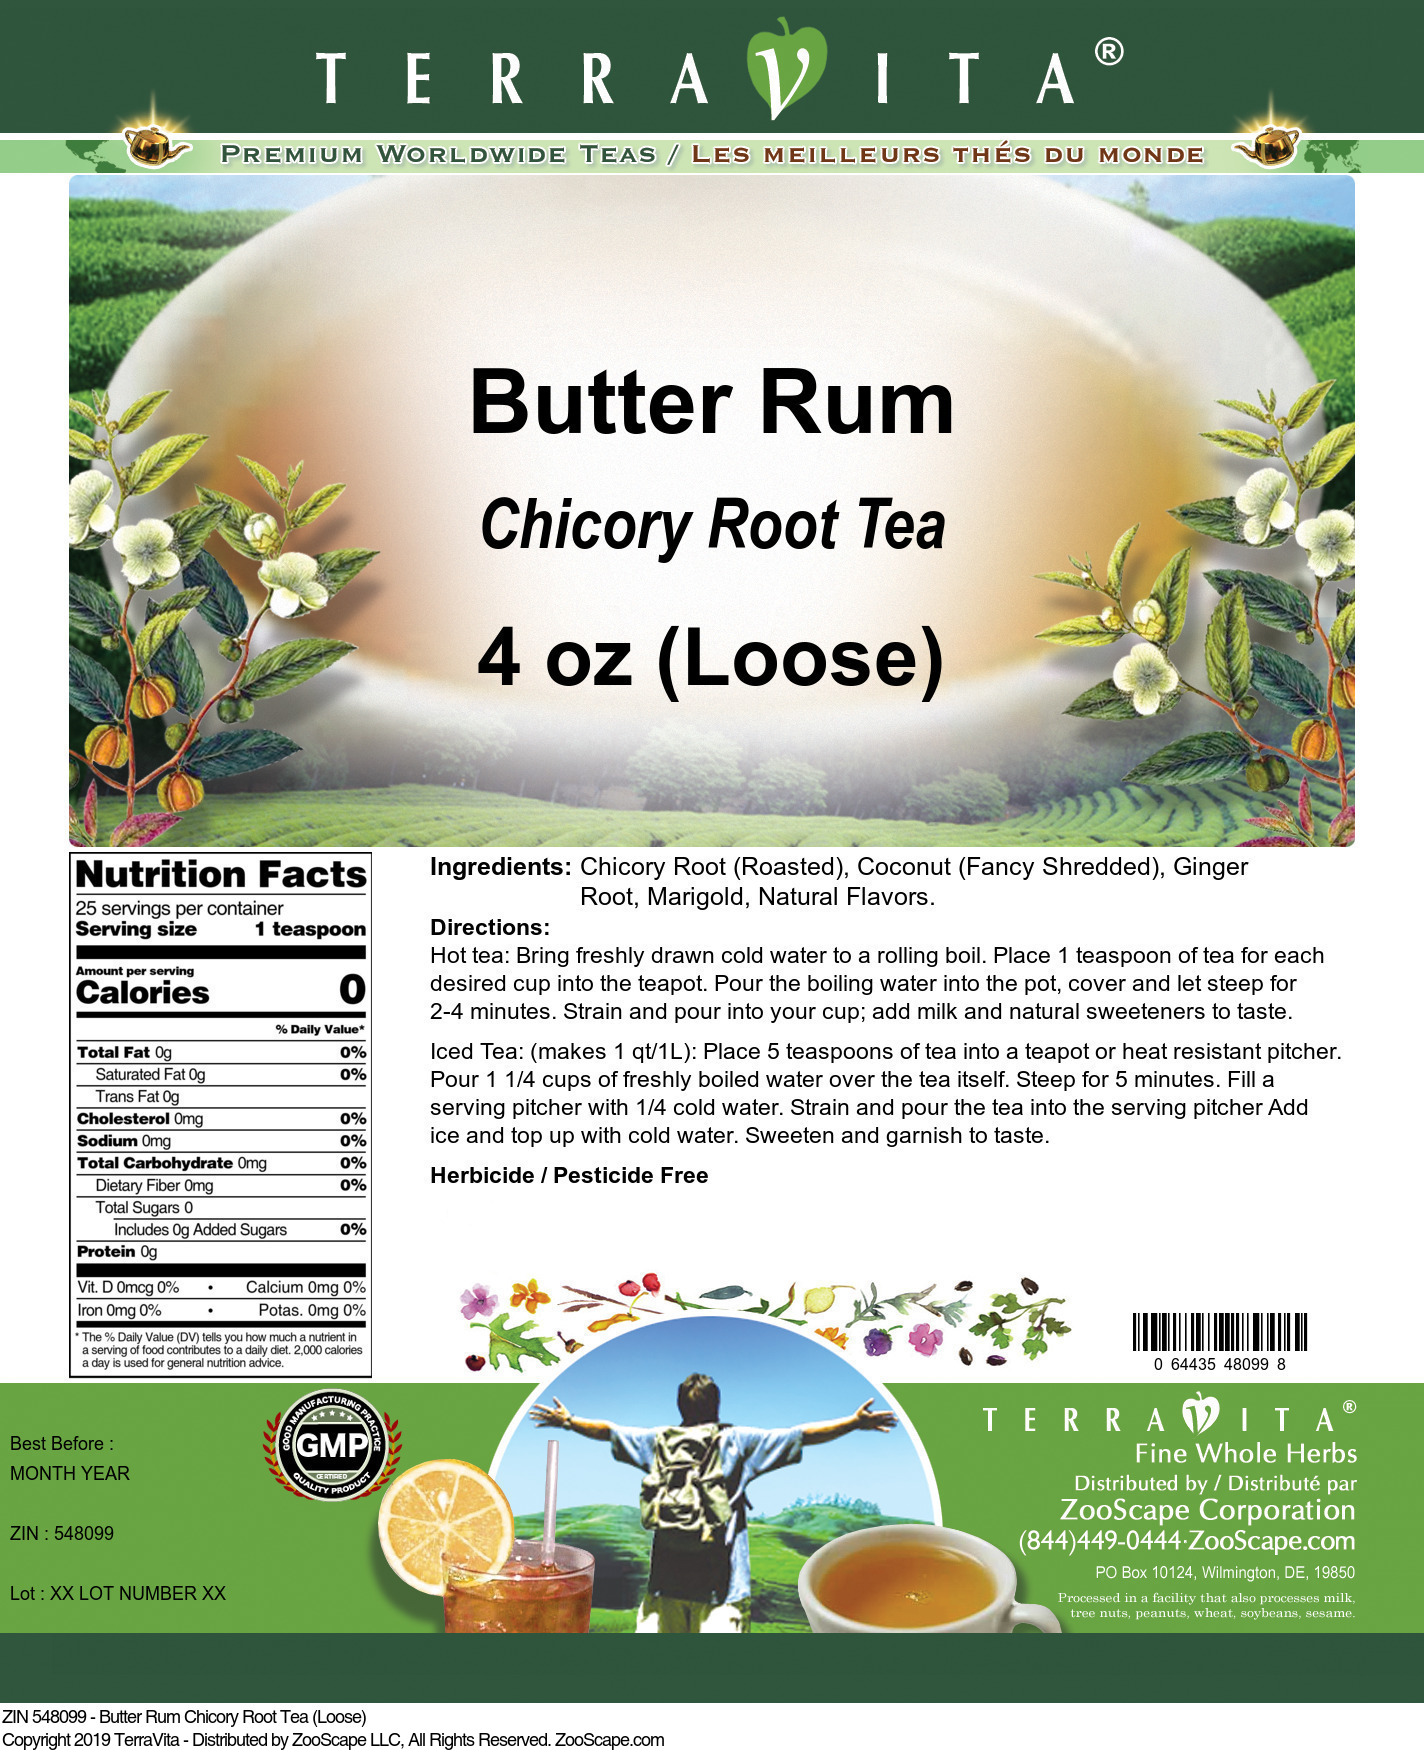 Butter Rum Chicory Root Tea (Loose) - Label